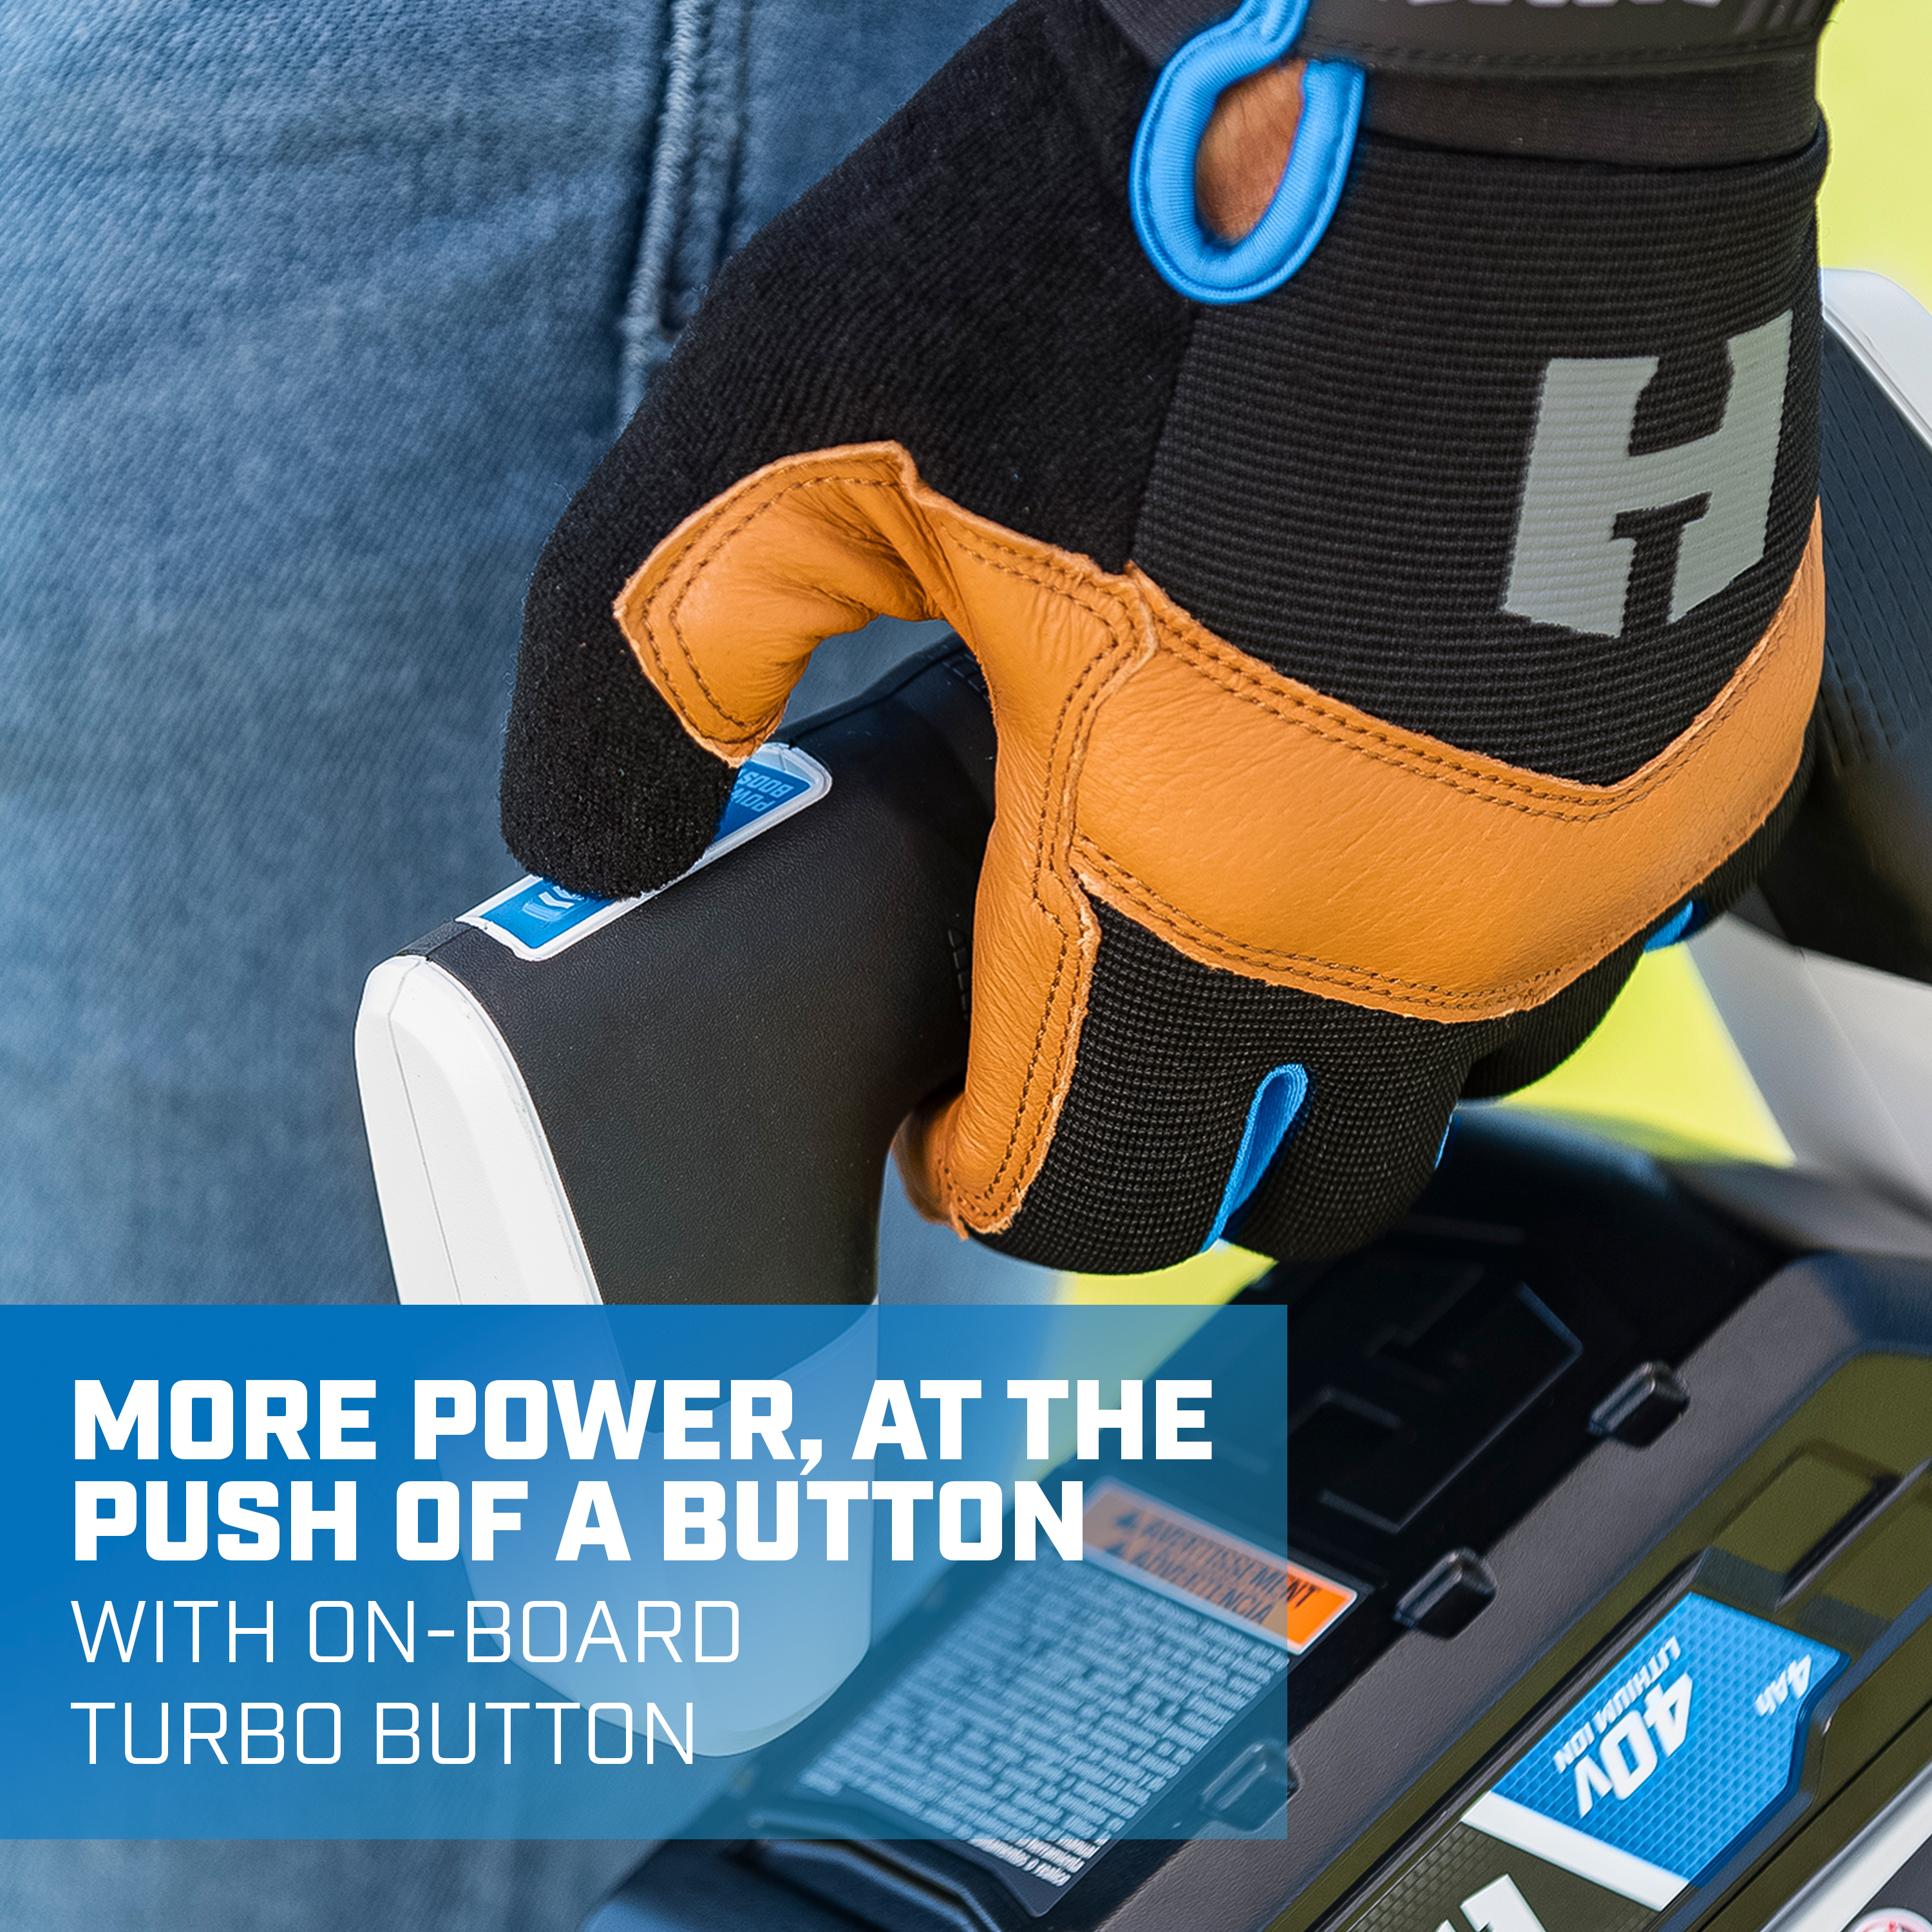 More power at the push of a button with on-board turbo button